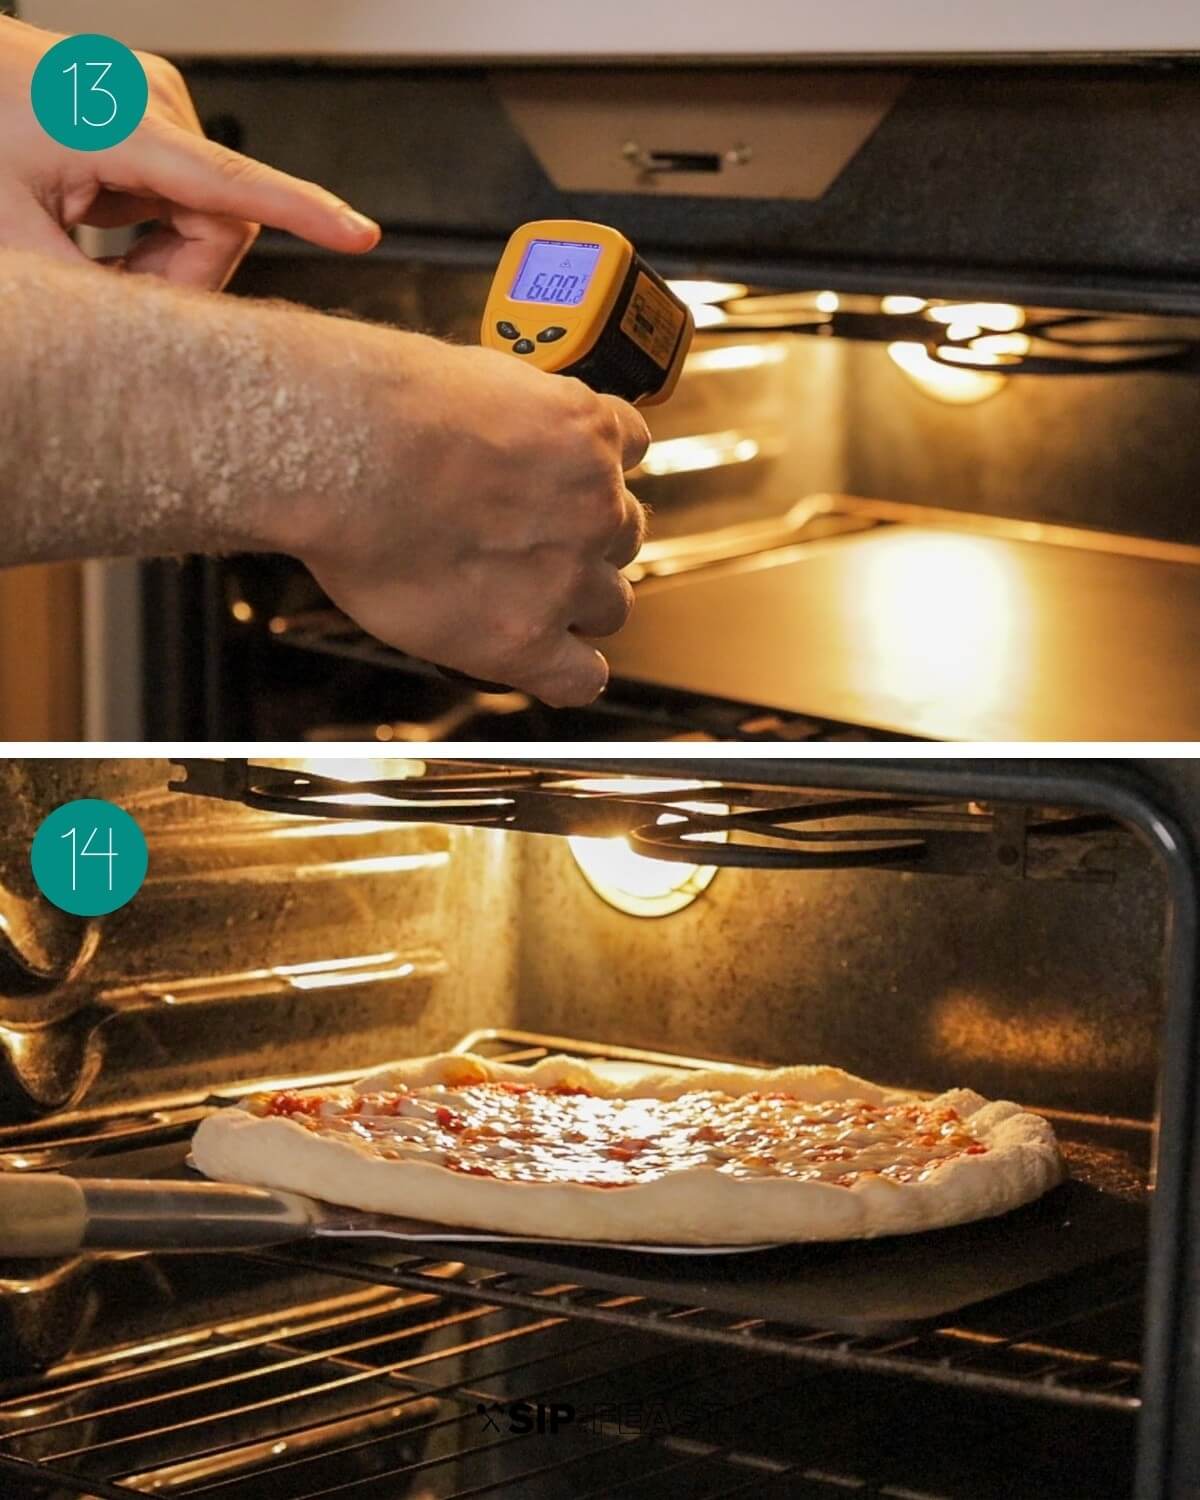 Pizza Steel 101 - Prep a Steel Plate for Pizza Making - Sip and Feast